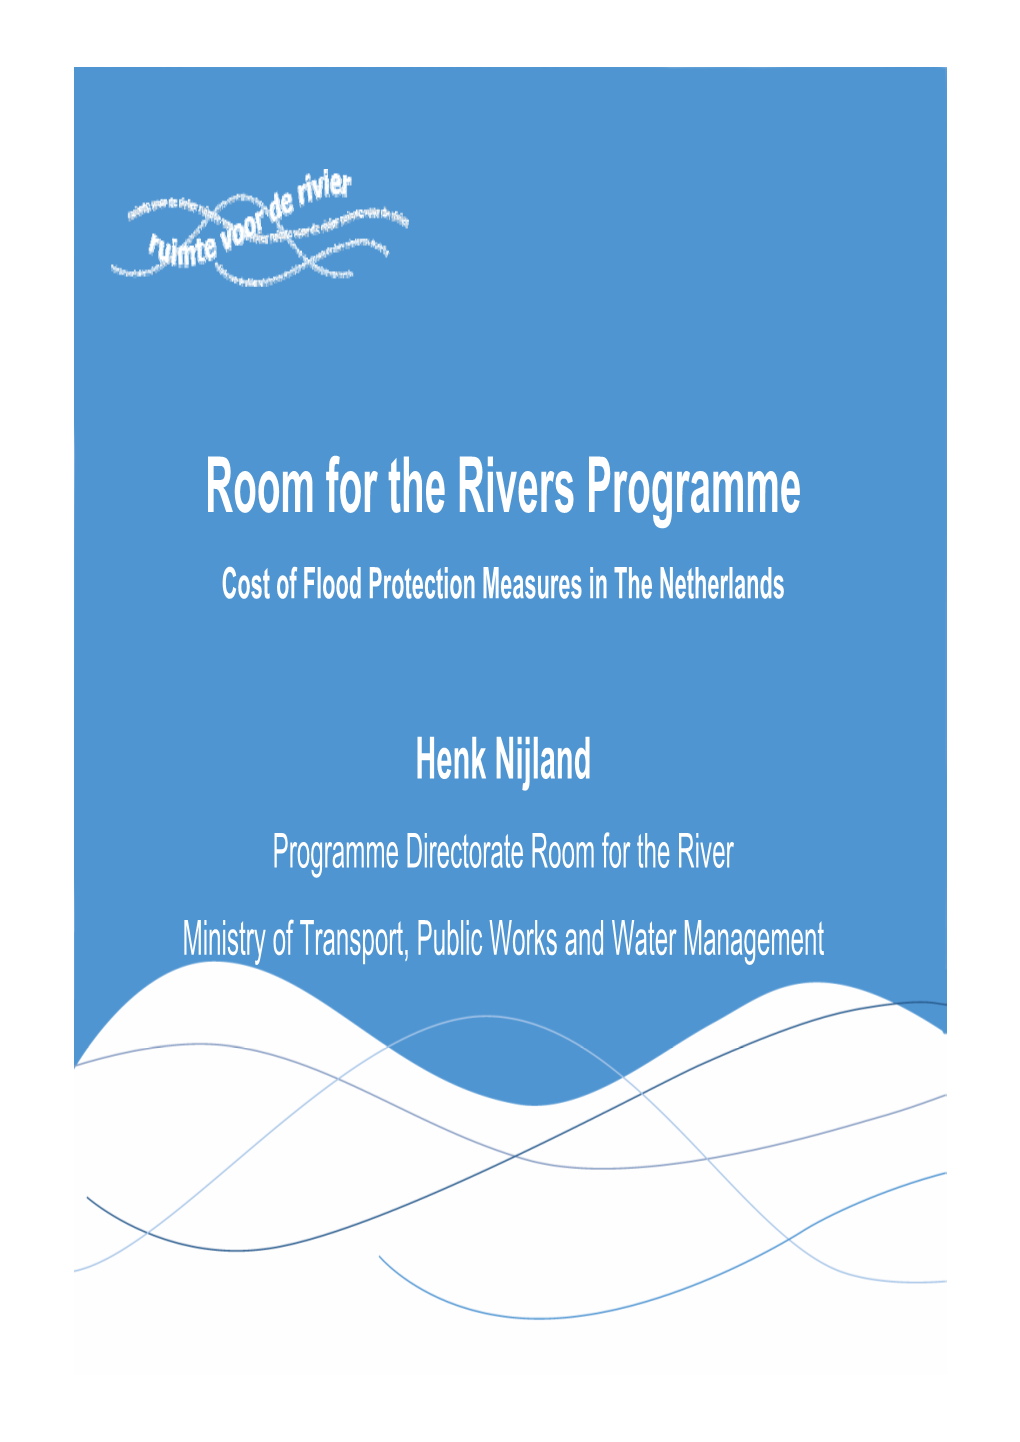 Room for the Rivers Programme Cost of Flood Protection Measures in the Netherlands